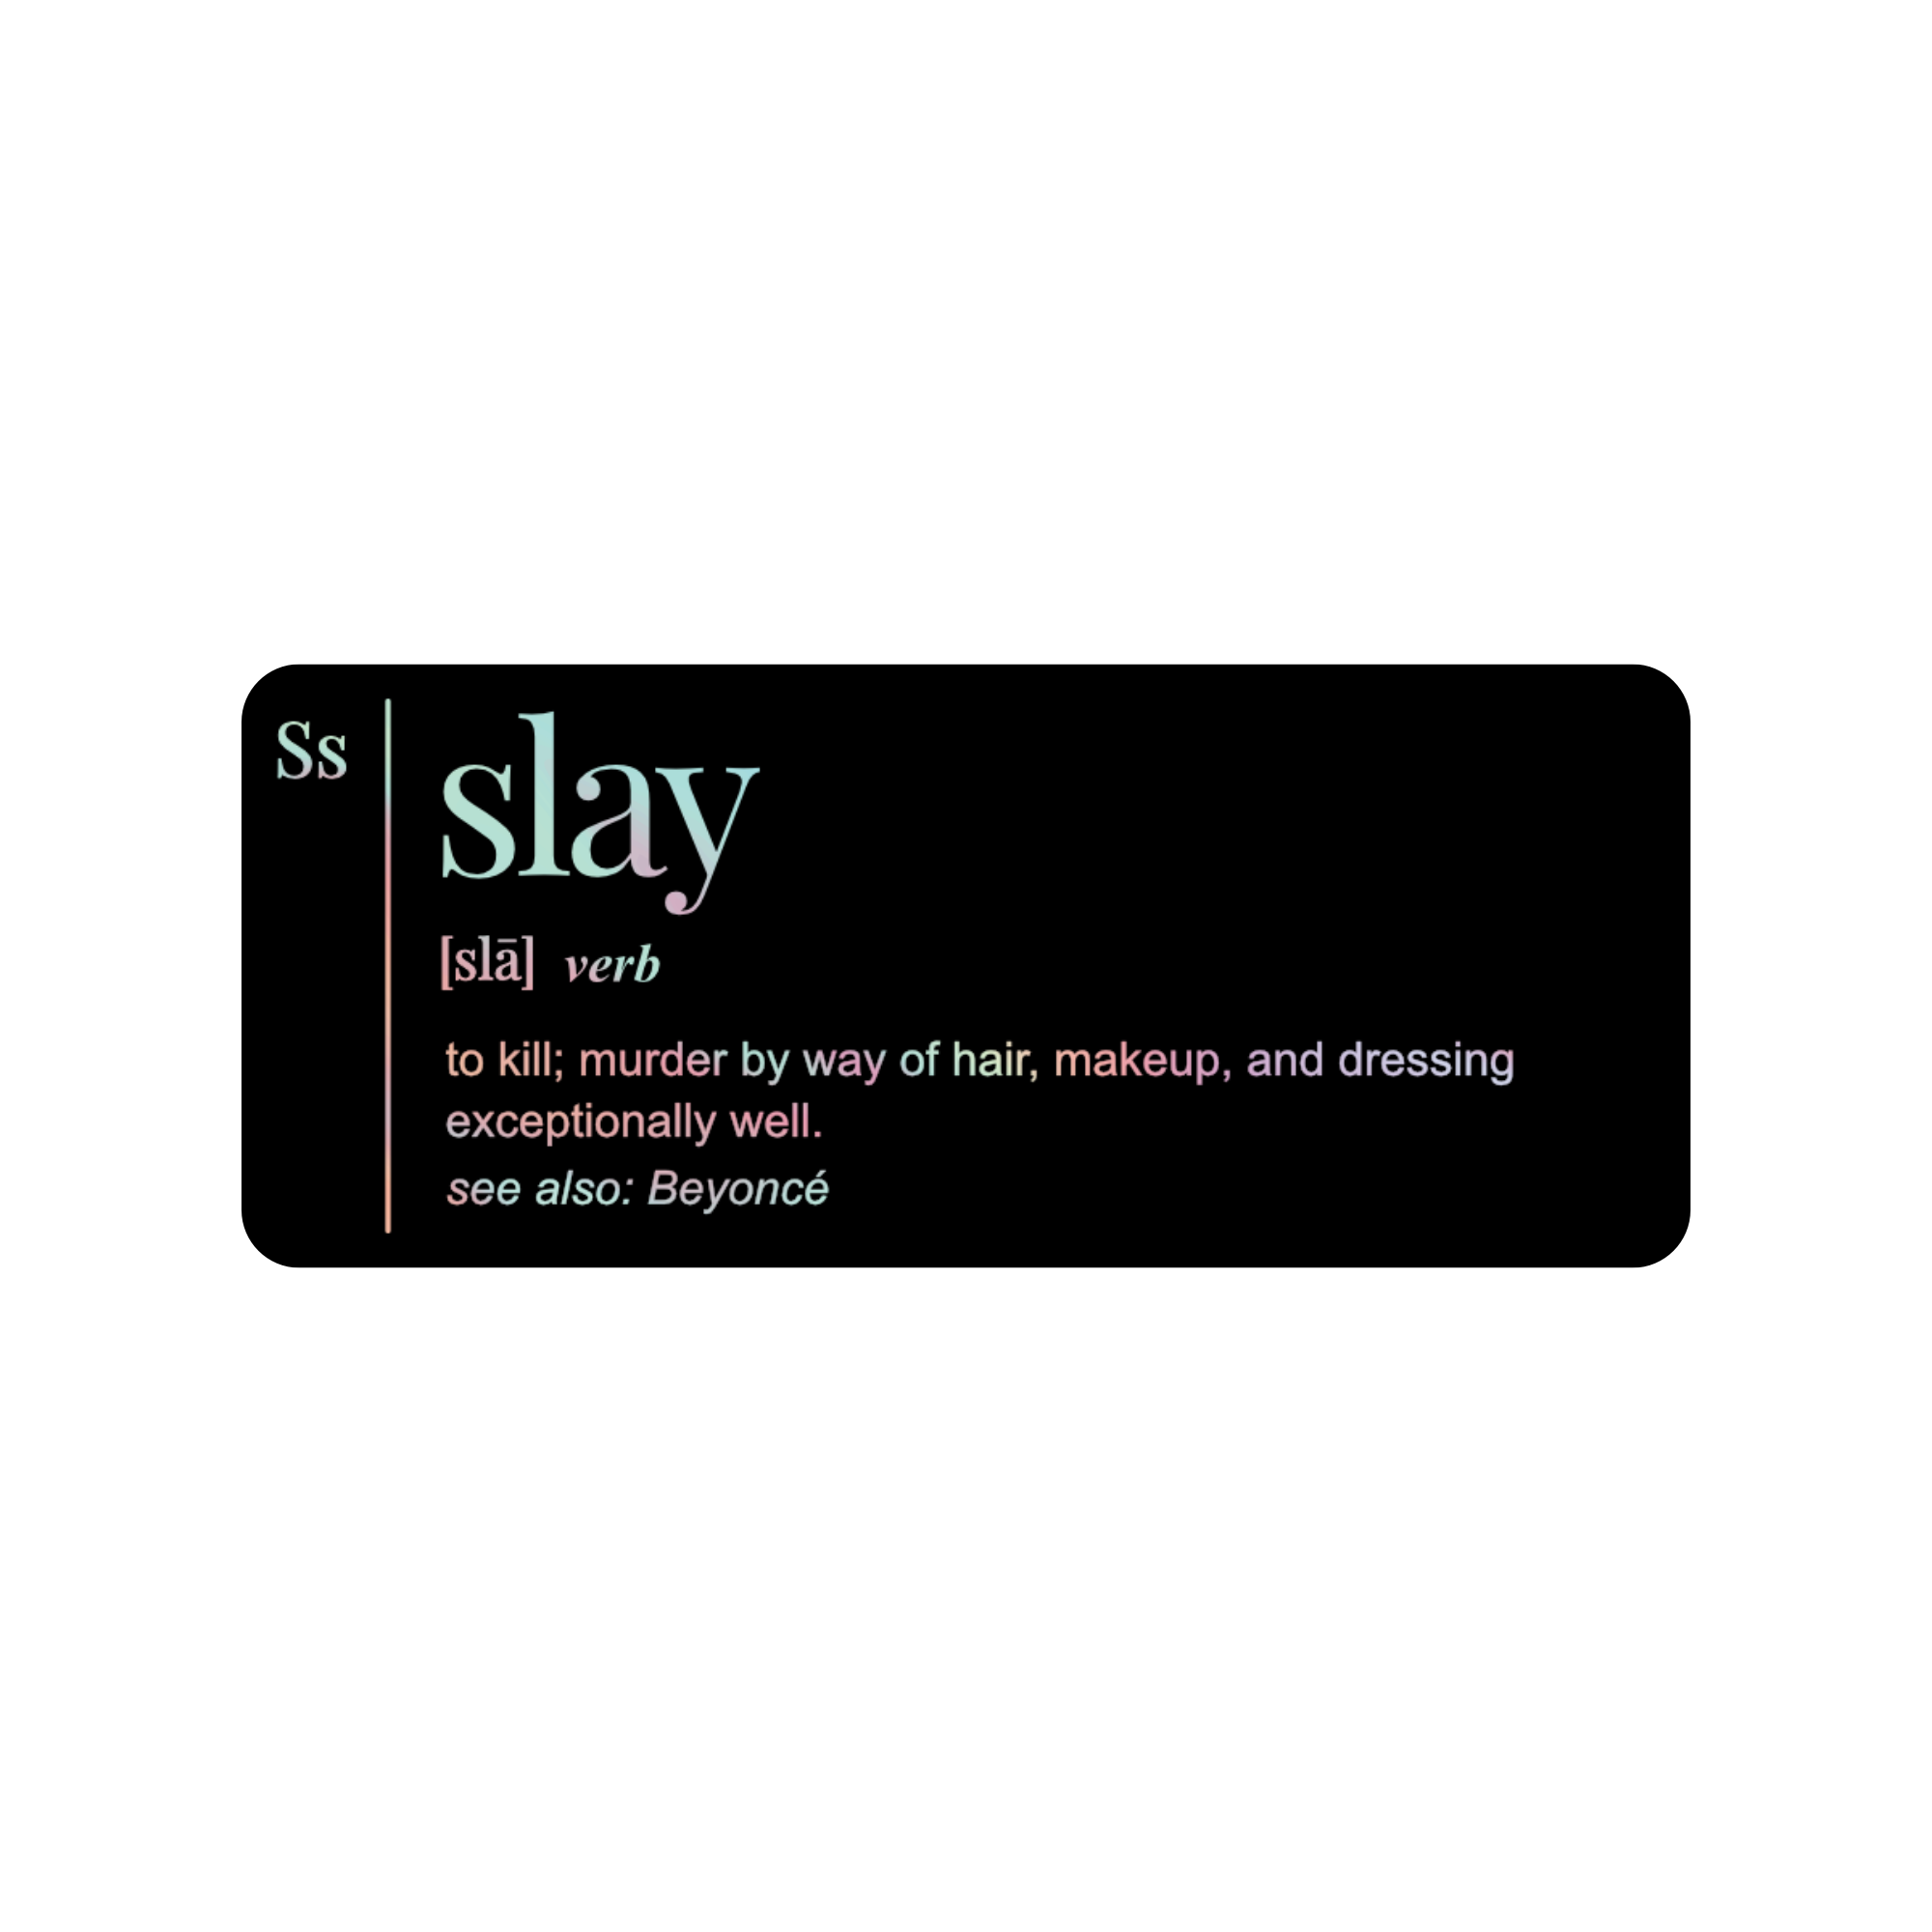 How do you say What is the meaning of slay/slaying?? I'm confused  in  English (US)?